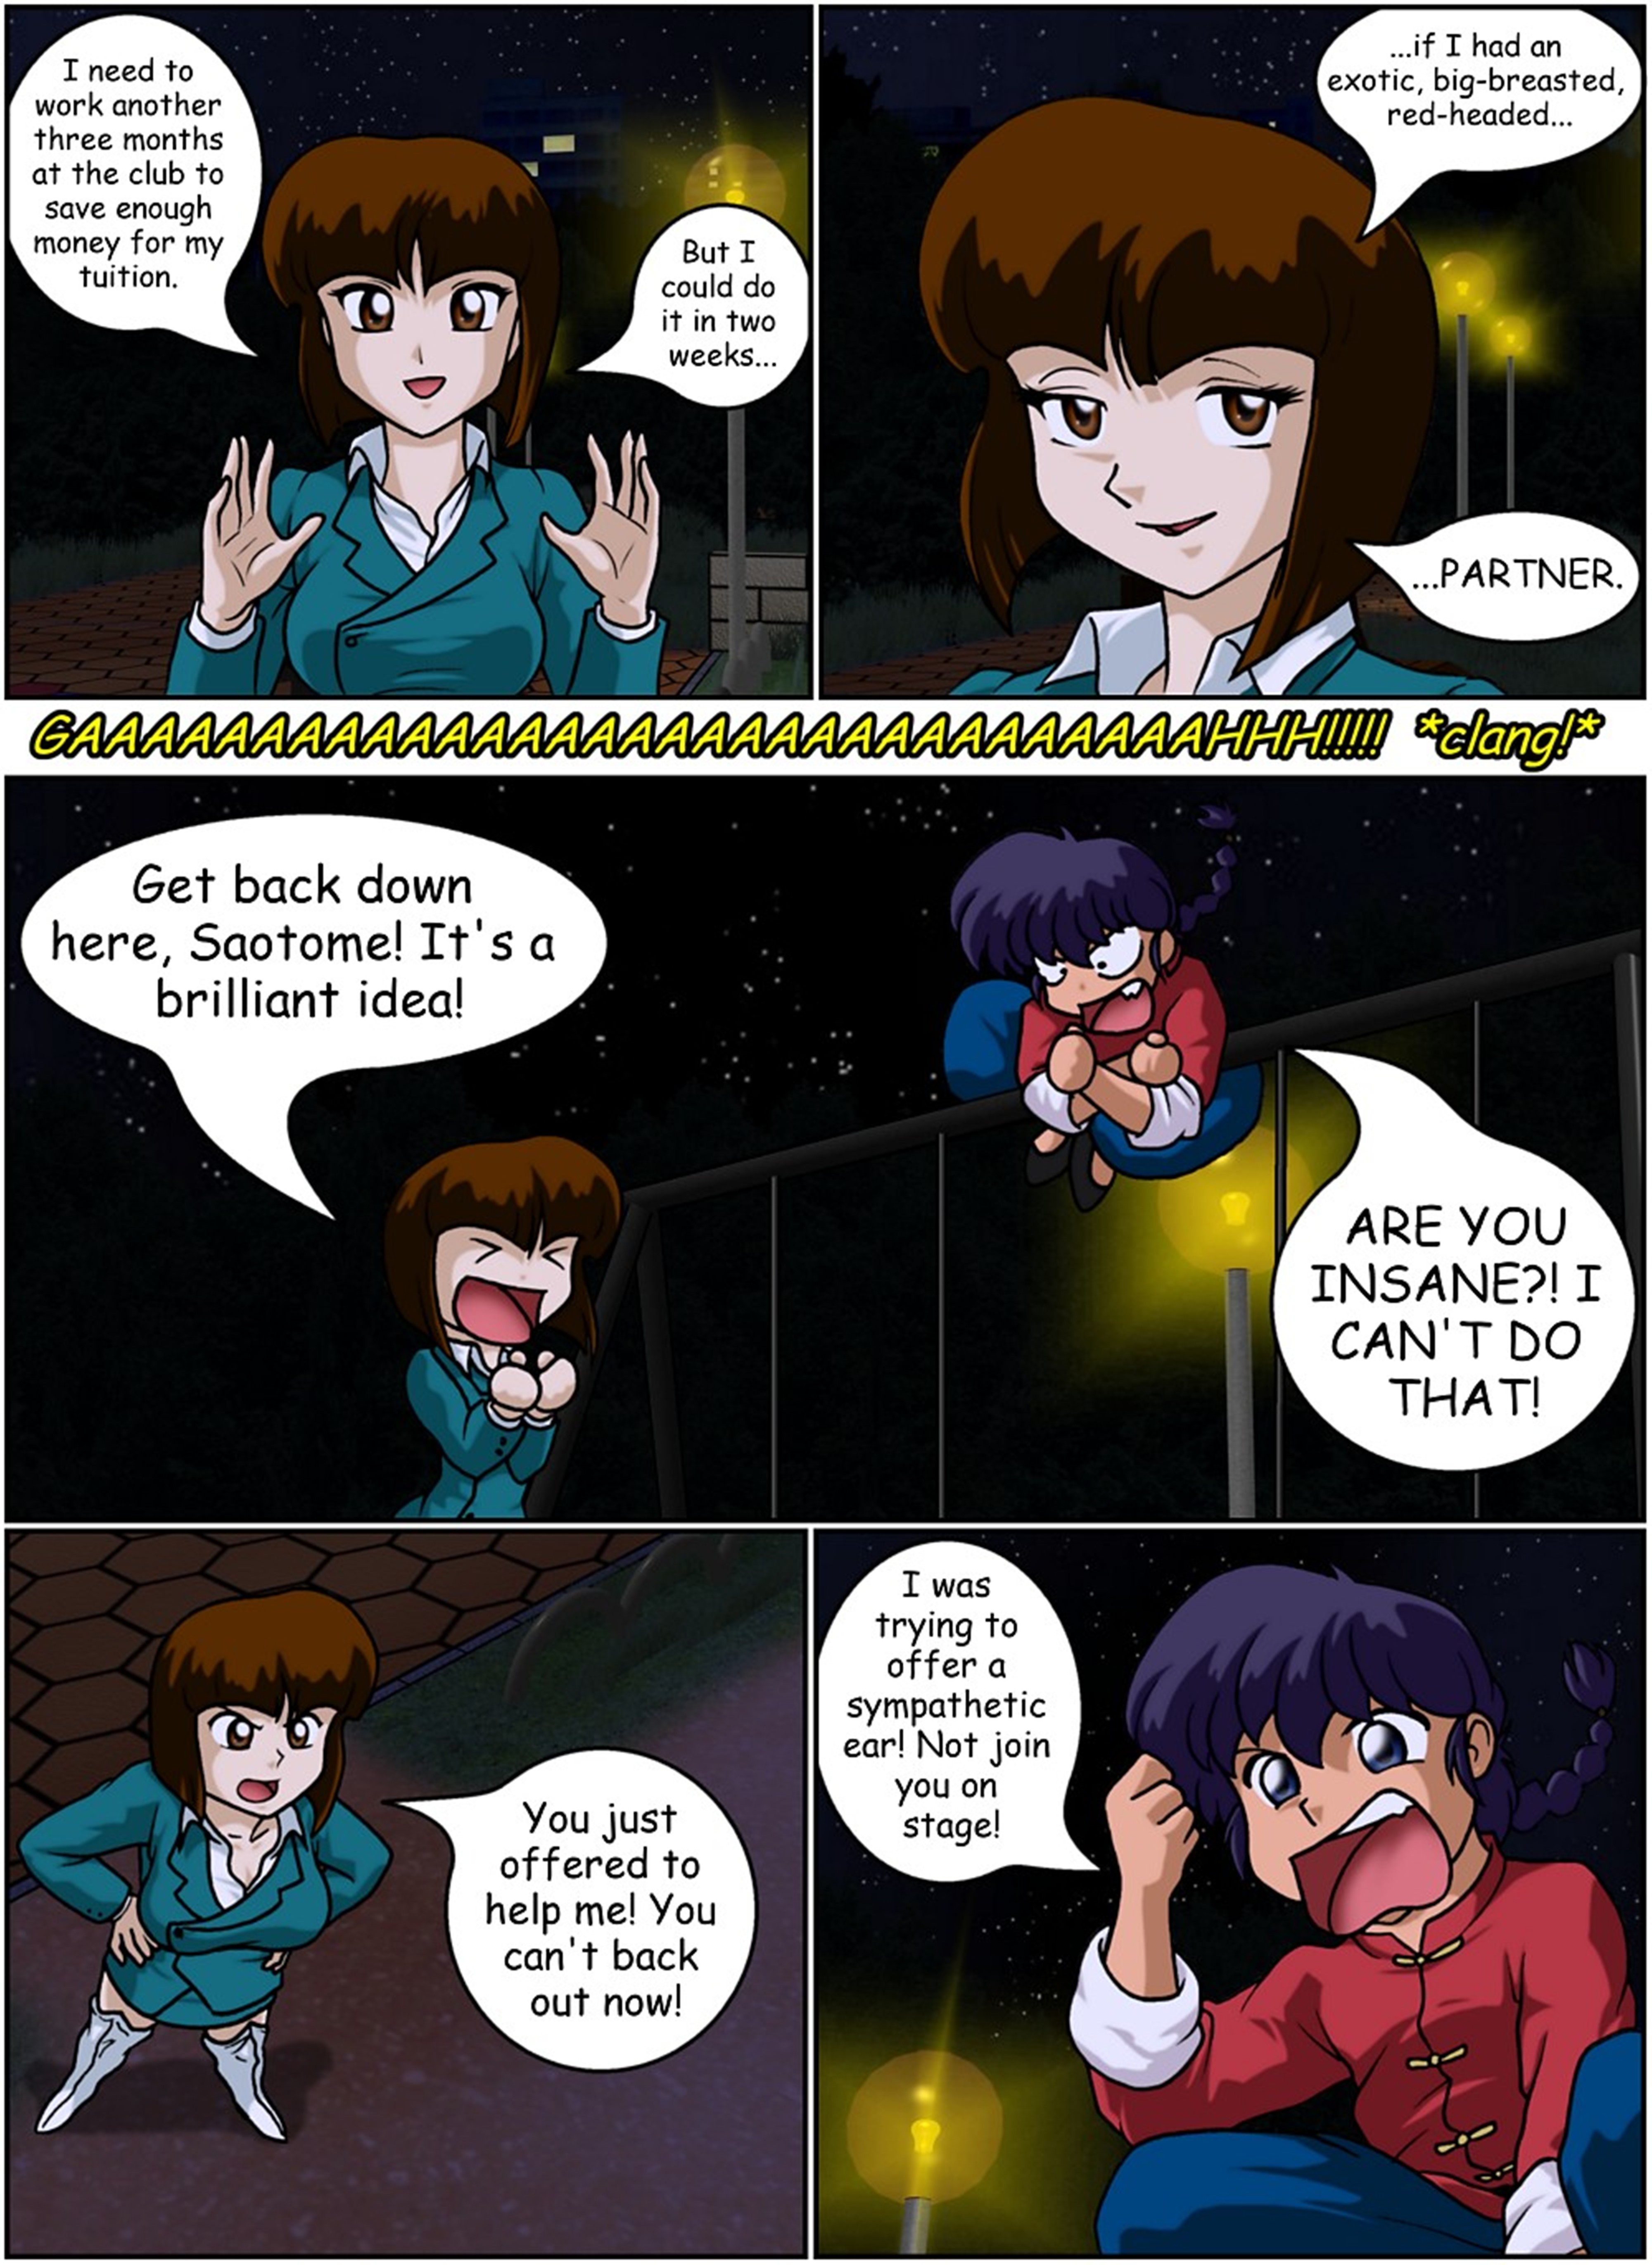 Ranma - Queen of the Night Part 1-2.